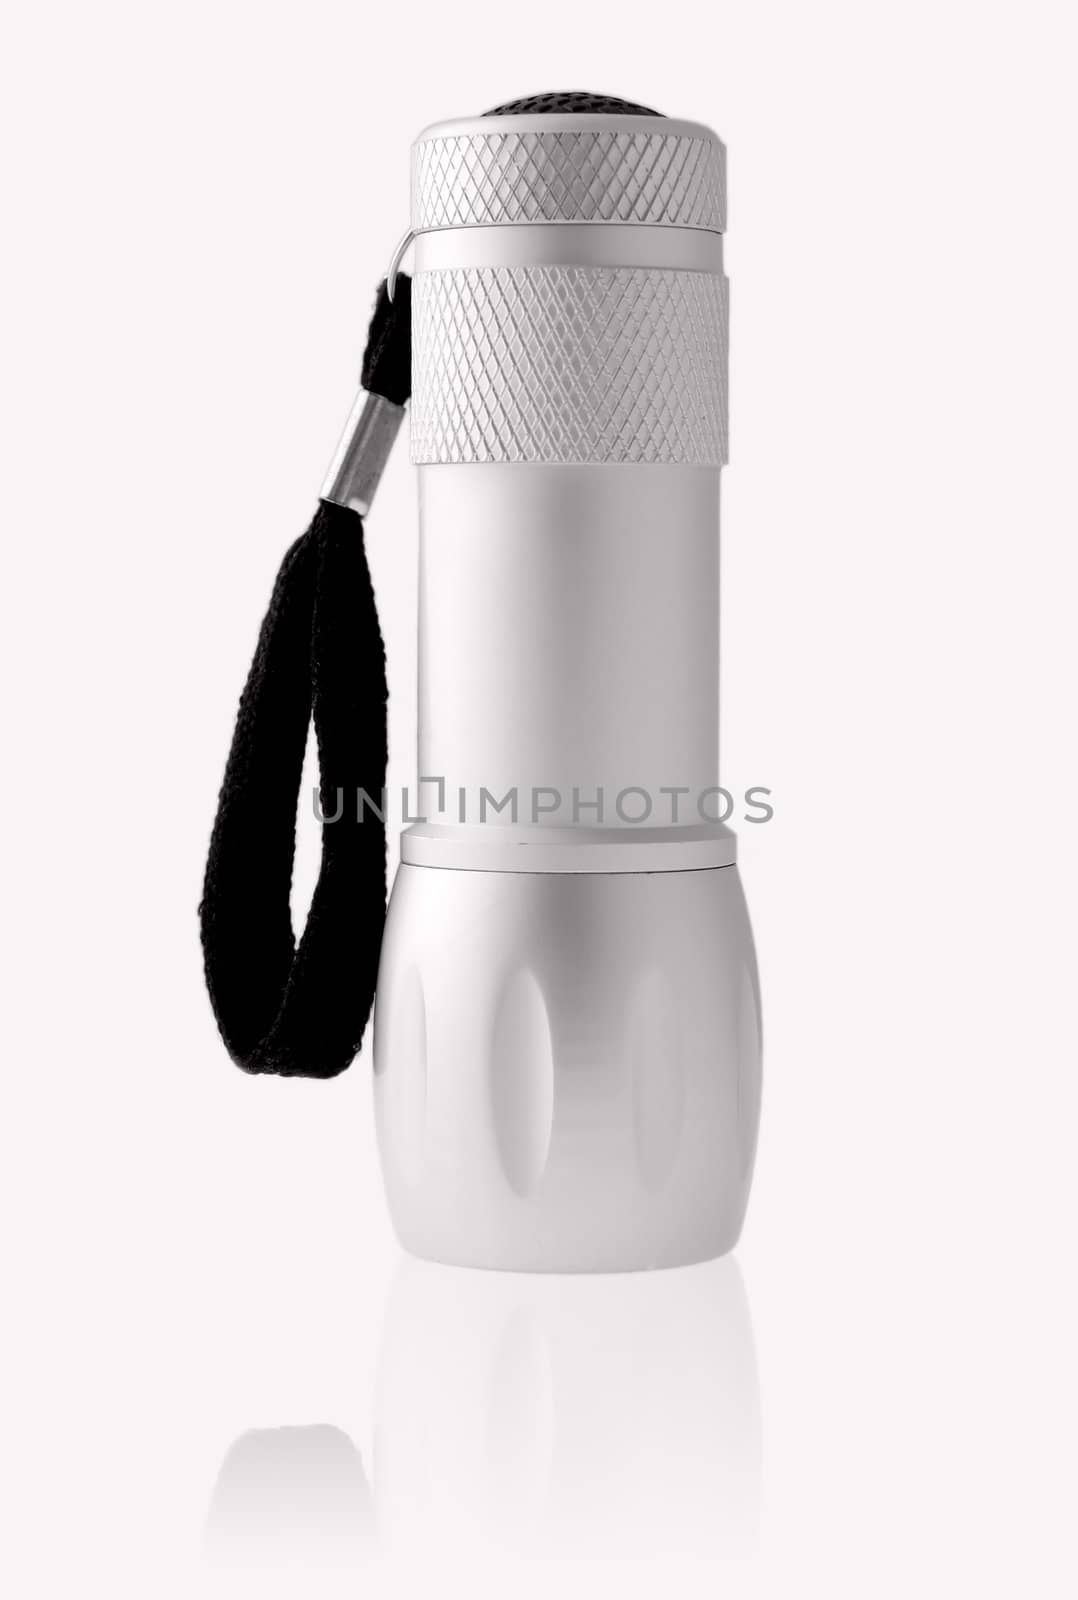 torch on a white background by payee